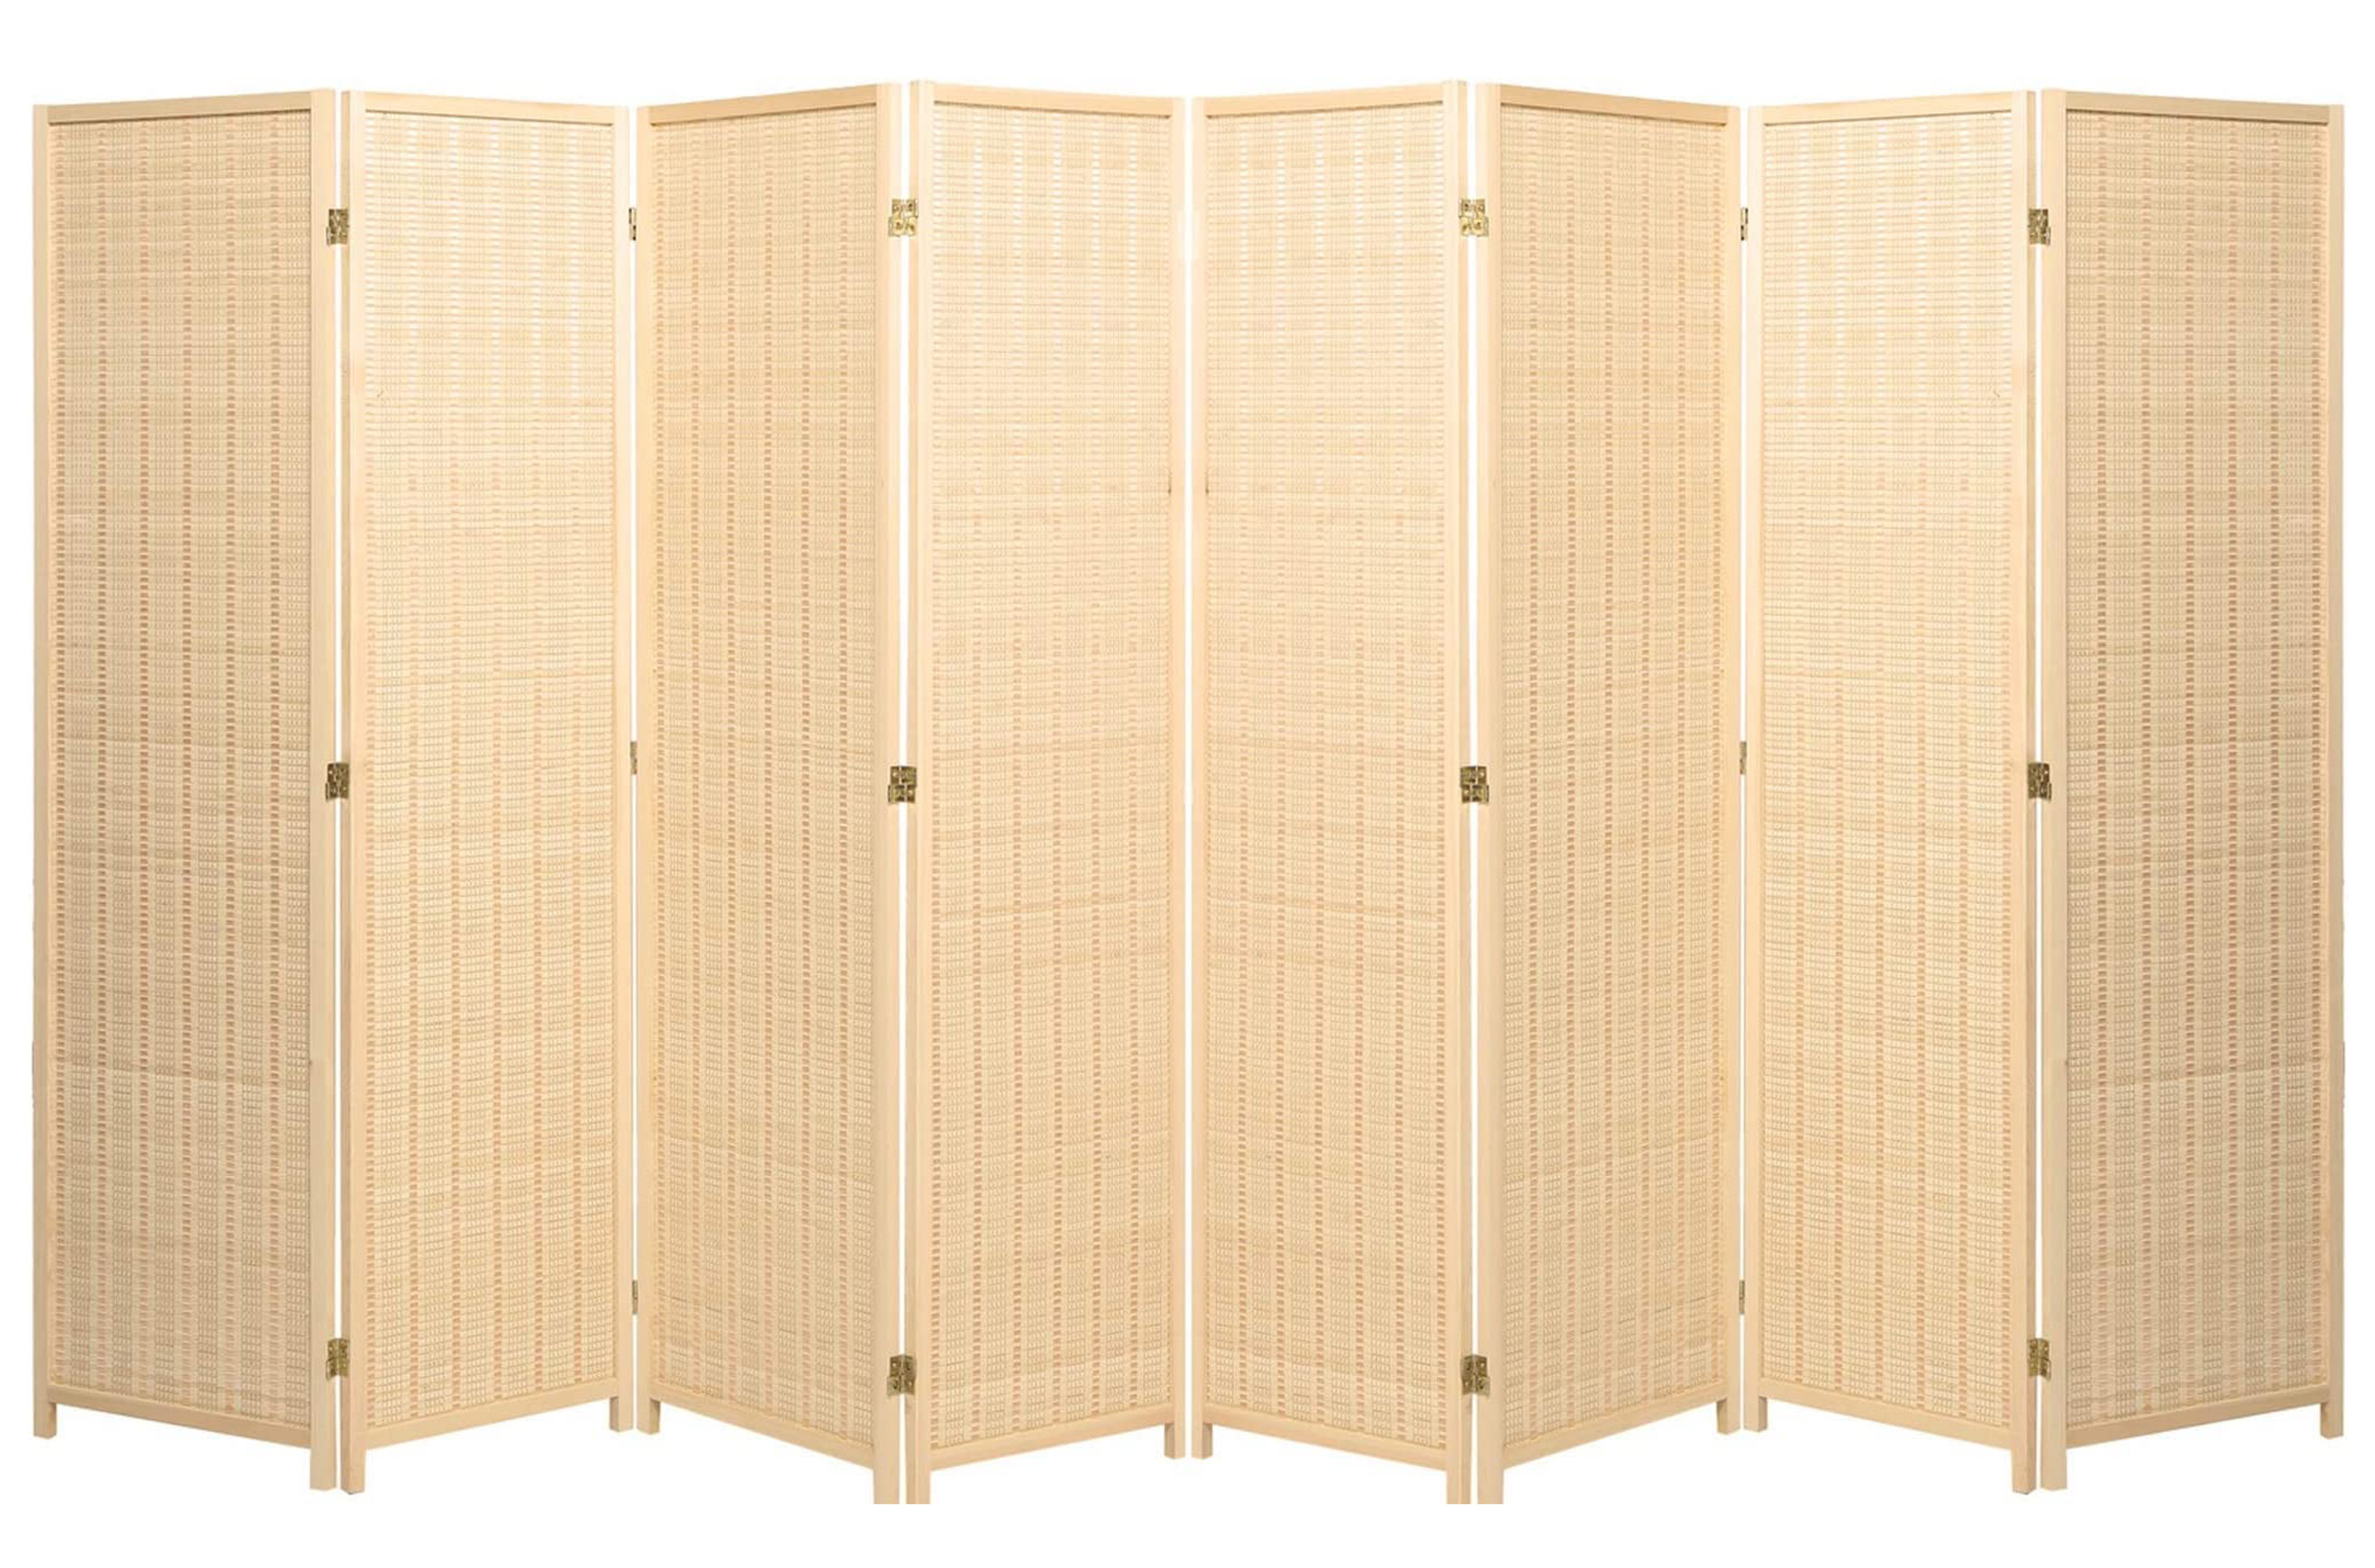 Legacy Decor Wood and Bamboo Weave 8 Panel Room Divider, 71" Tall, Natural Color - image 1 of 4